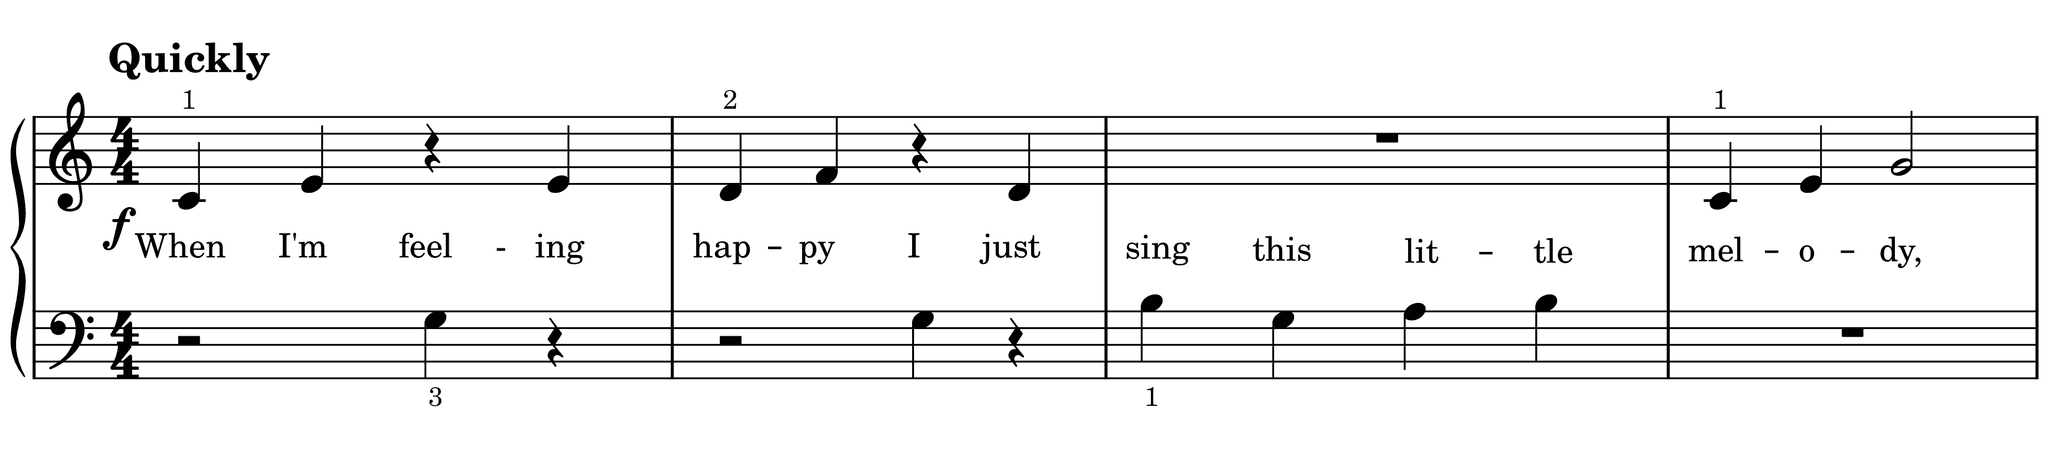 Excerpt of A Very Happy Song 